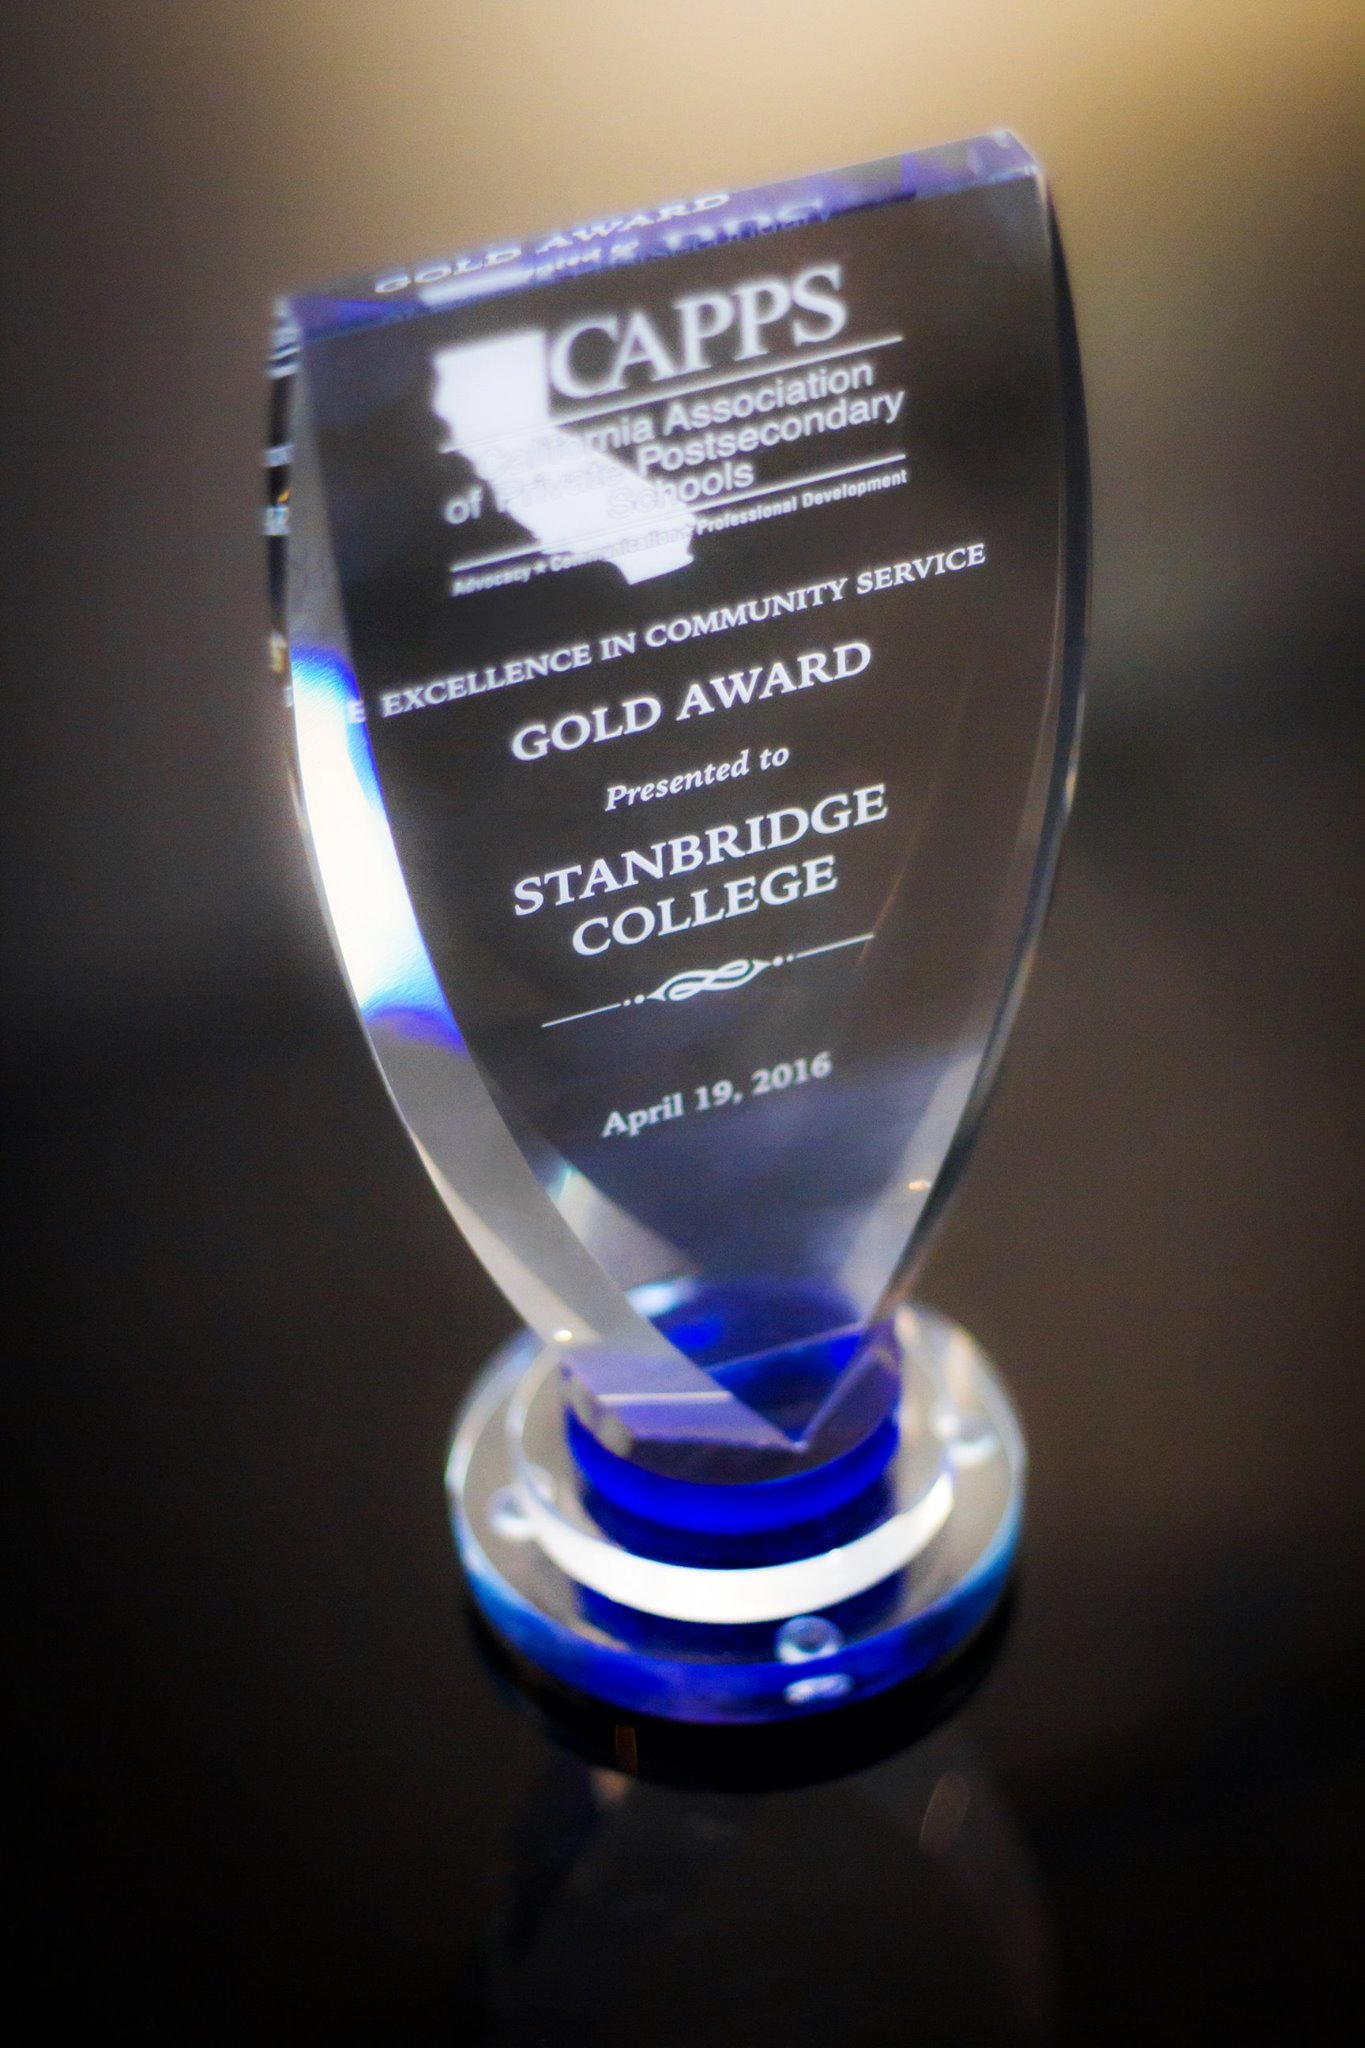 Stanbridge College Presented The 2016 CAPPS Gold Award For Excellence In Community Service  